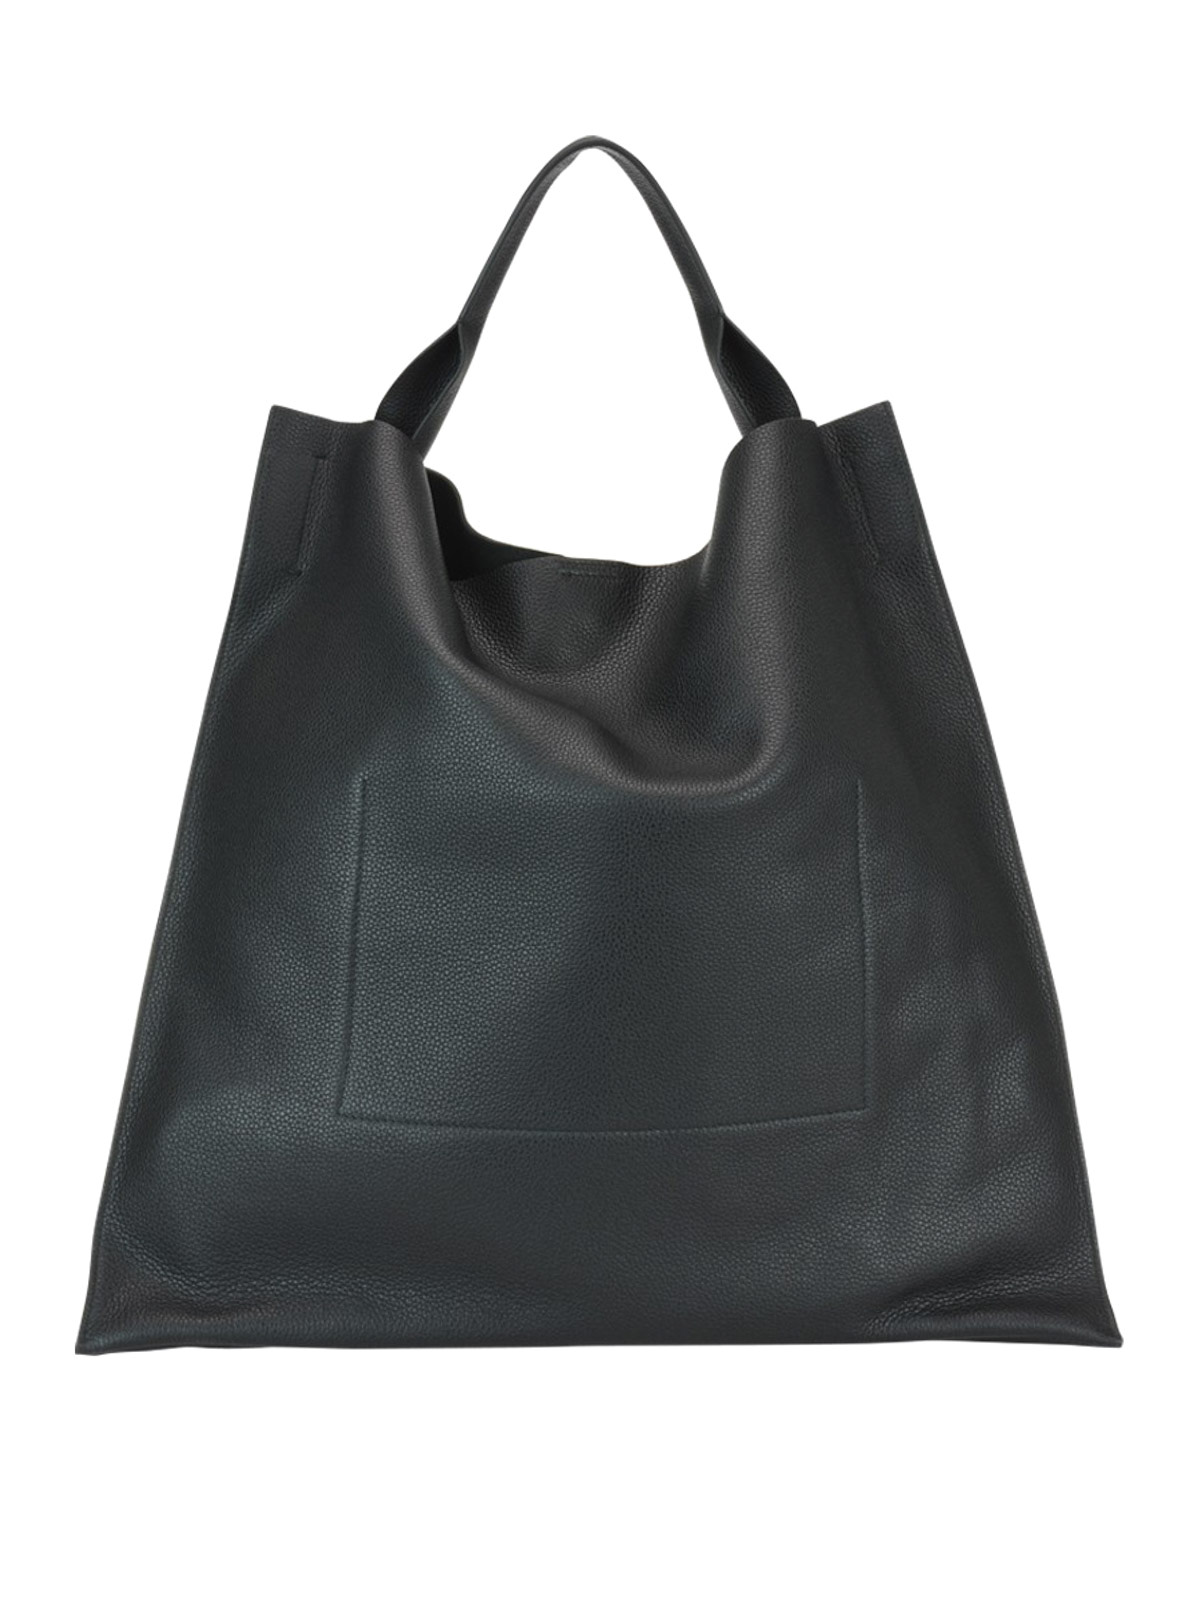 Totes bags Jil Sander - Xiao grained leather tote bag 